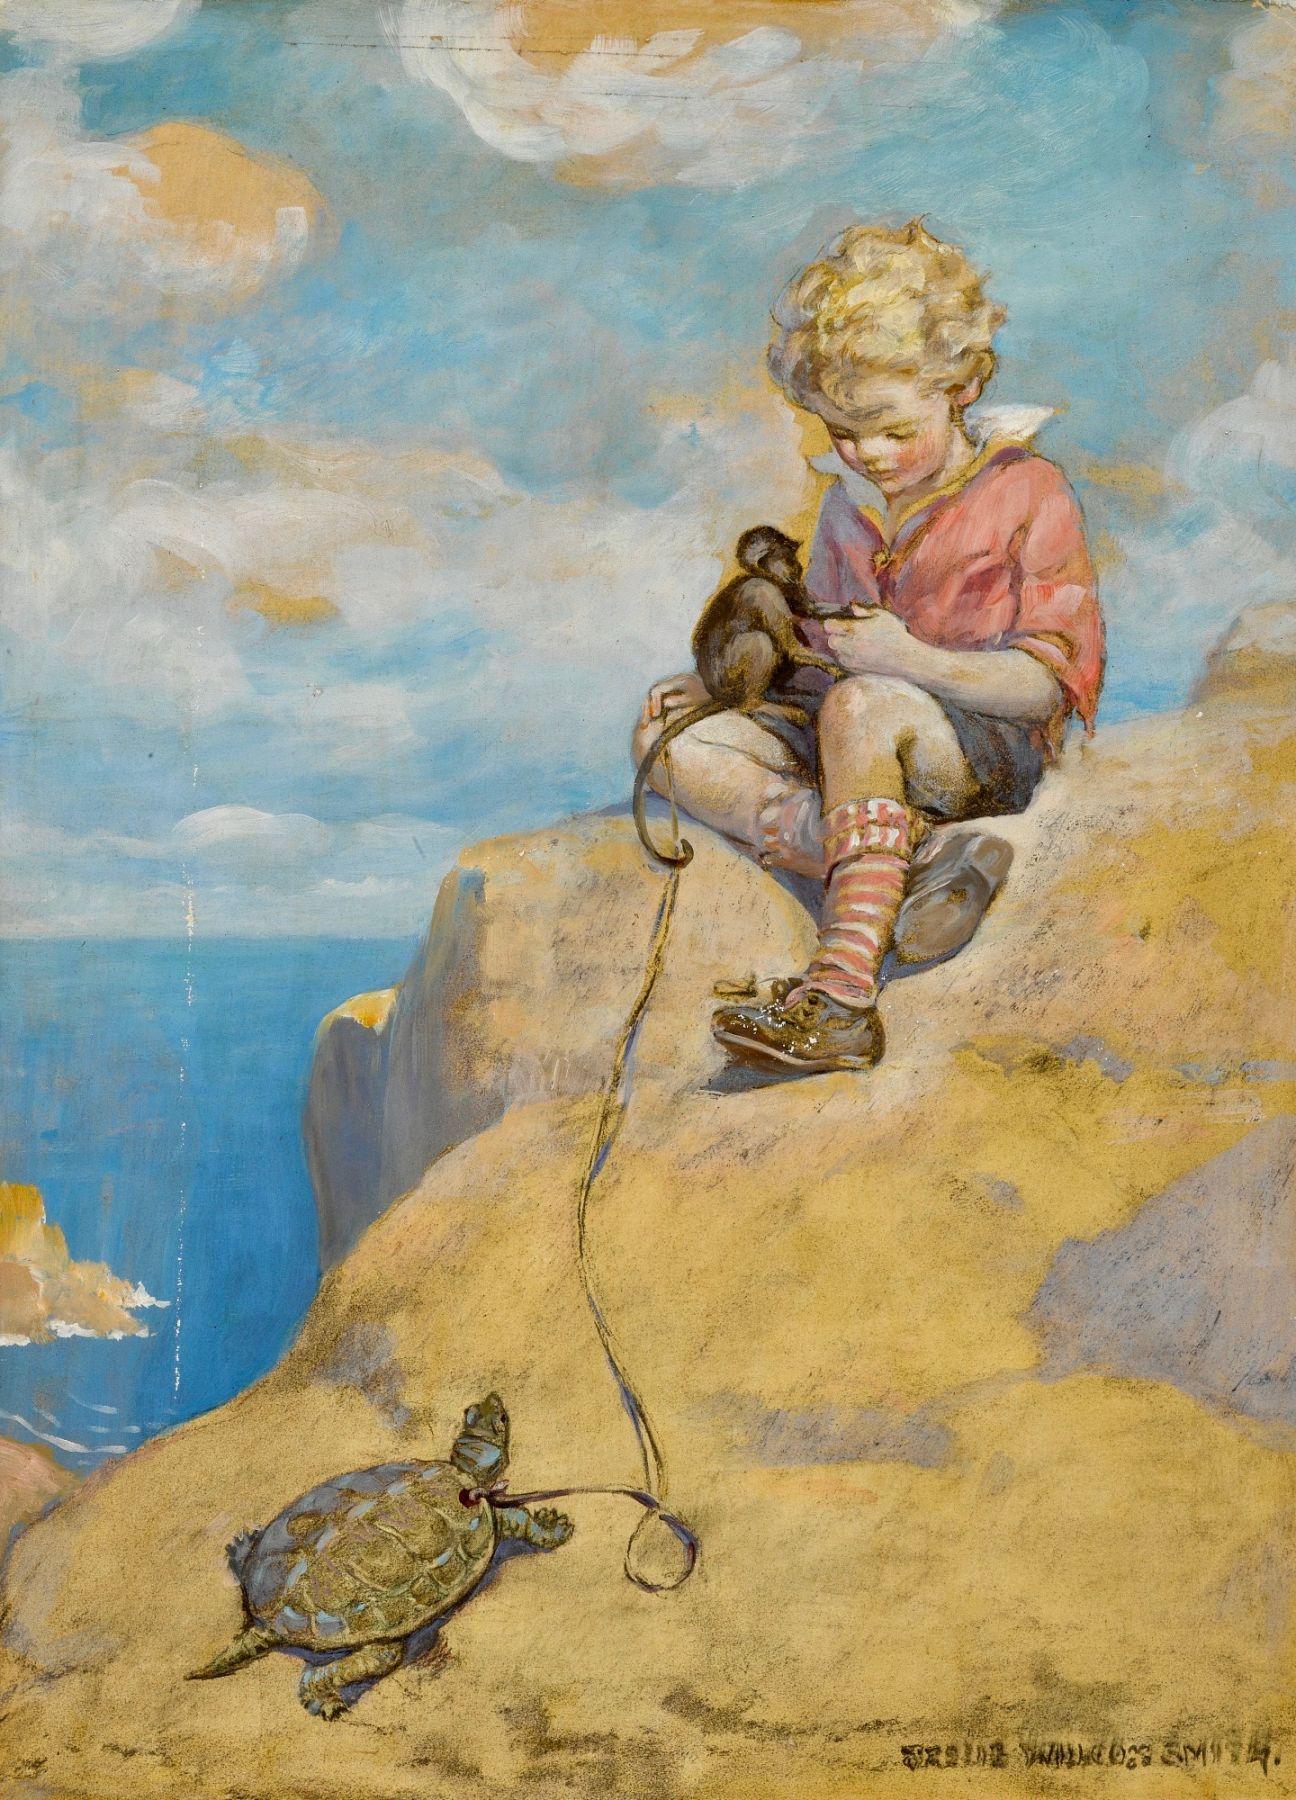 Jessie Willcox Smith Figurative Painting - Bobs, King of the Fortunate Isle